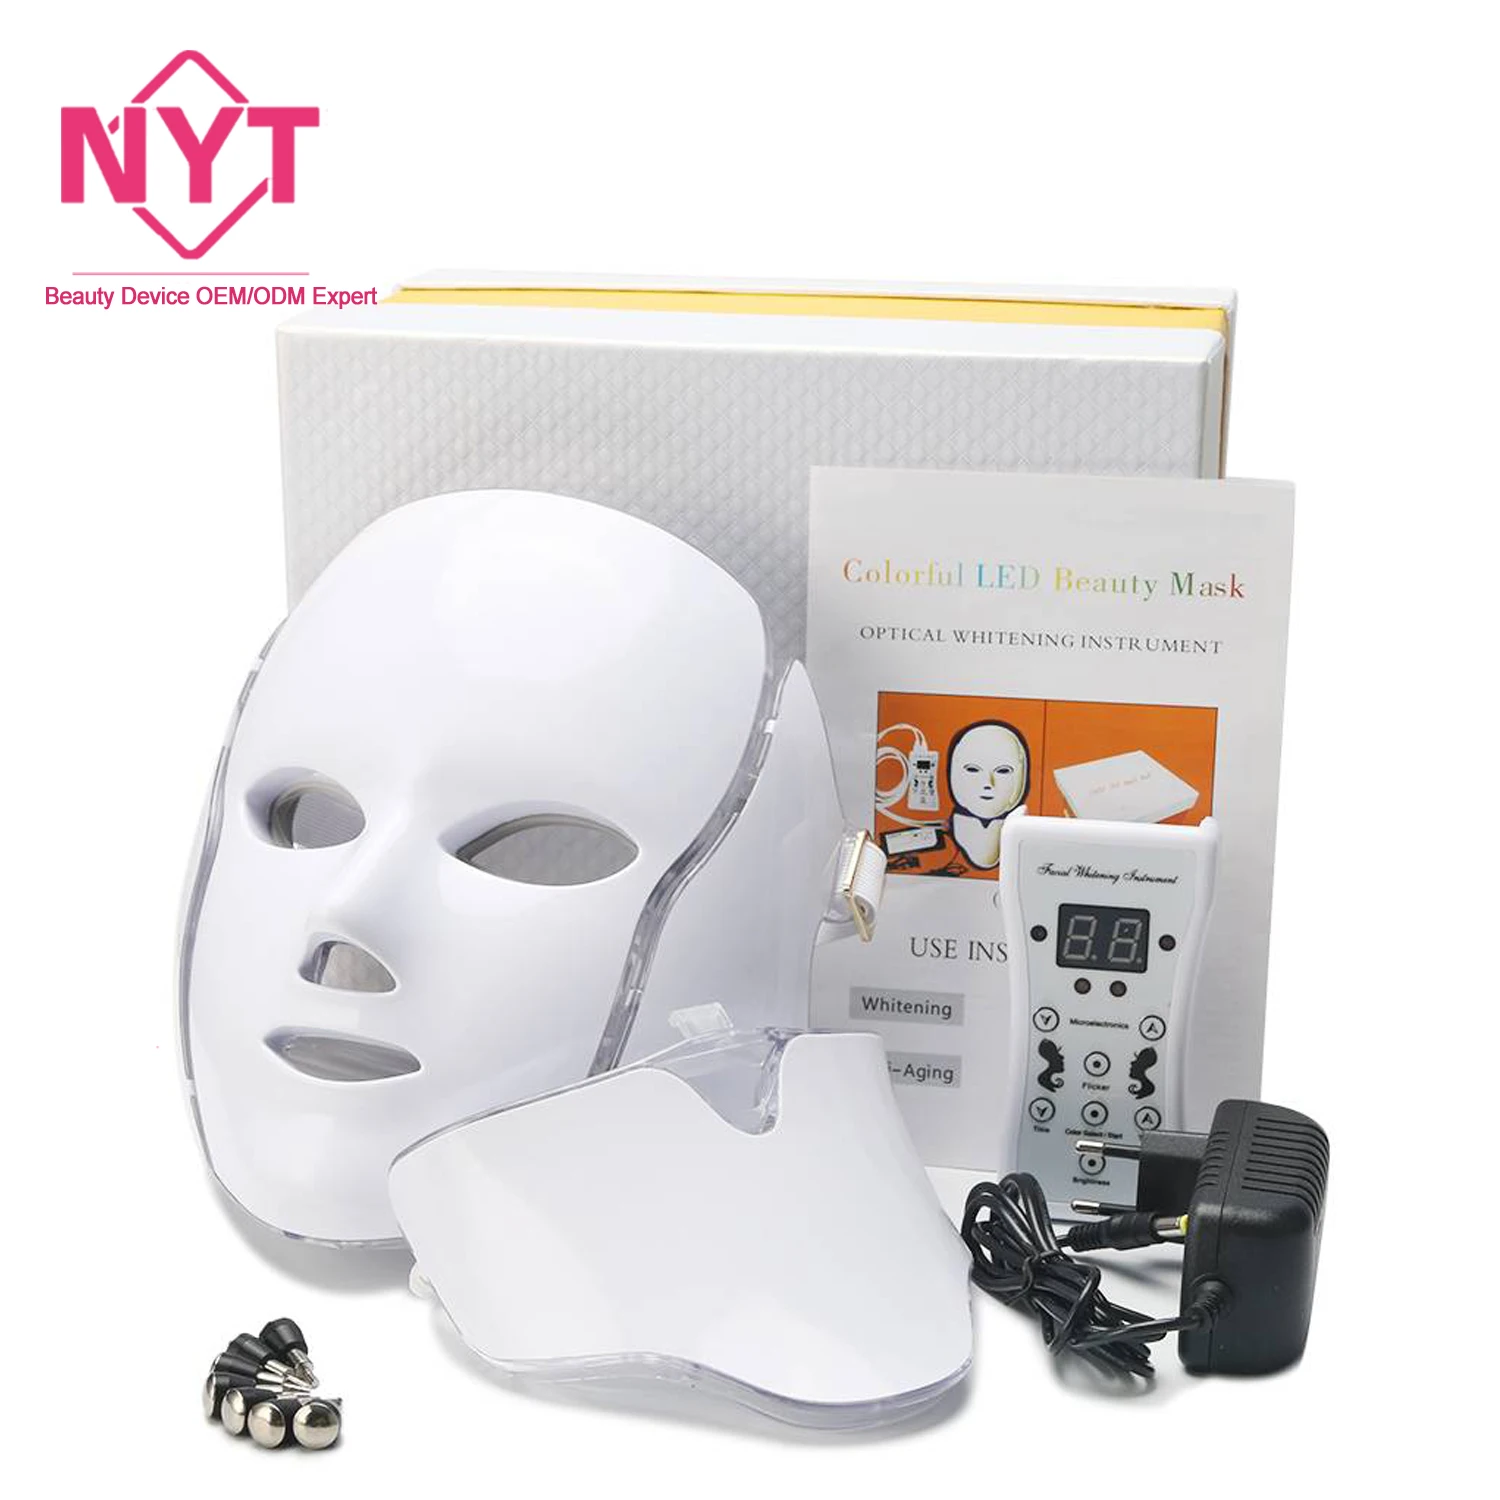 

2021 Newest Korea Pdt Technology Blue Red Treatment Acne Reduction Photon Facial Skin Care 7 Color Light Therapy Led Face Mask, White/gold